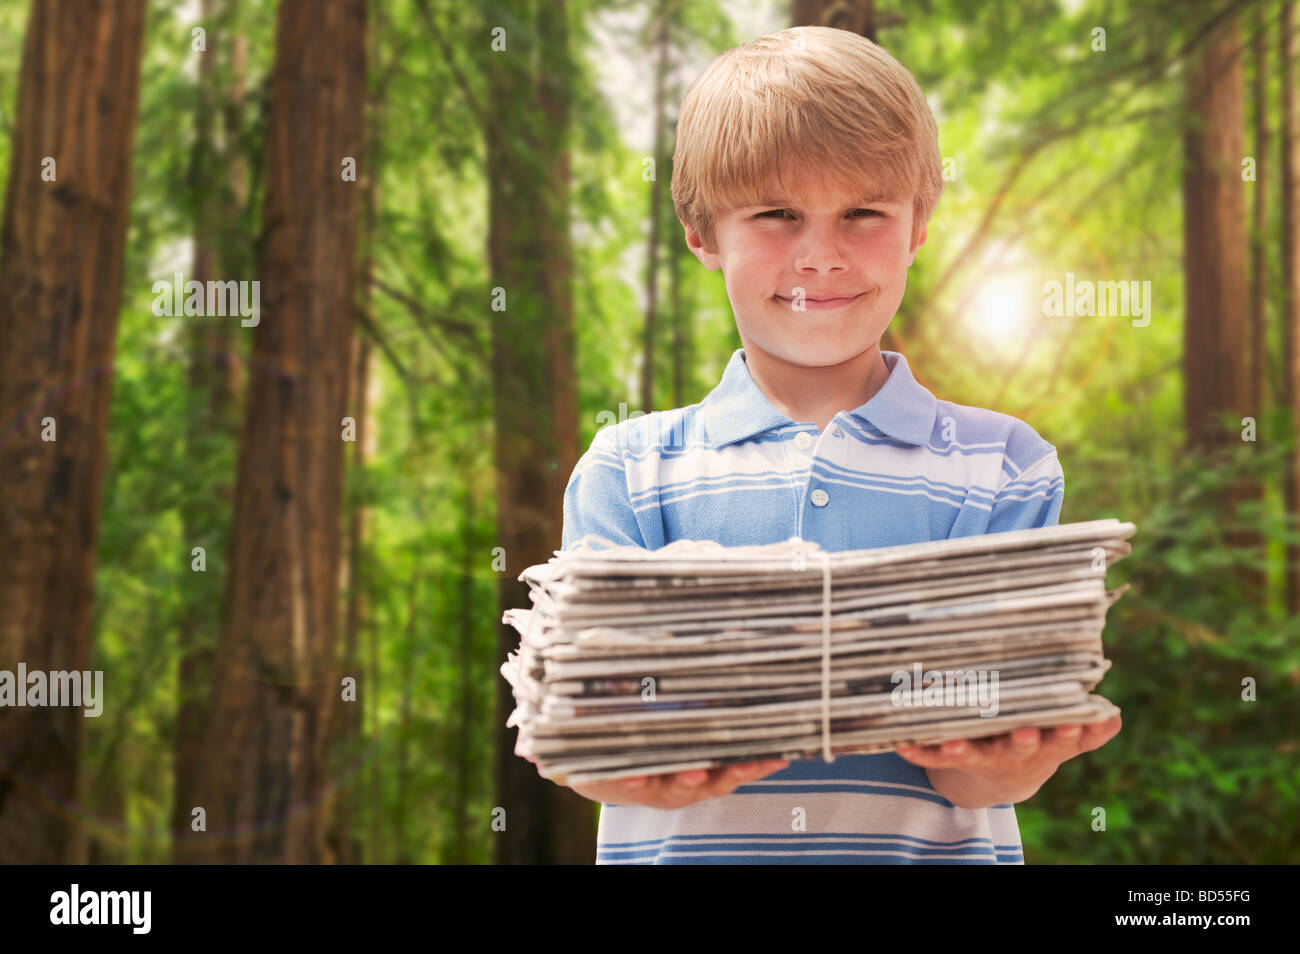 Young boy with stack of newspapers Stock Photo